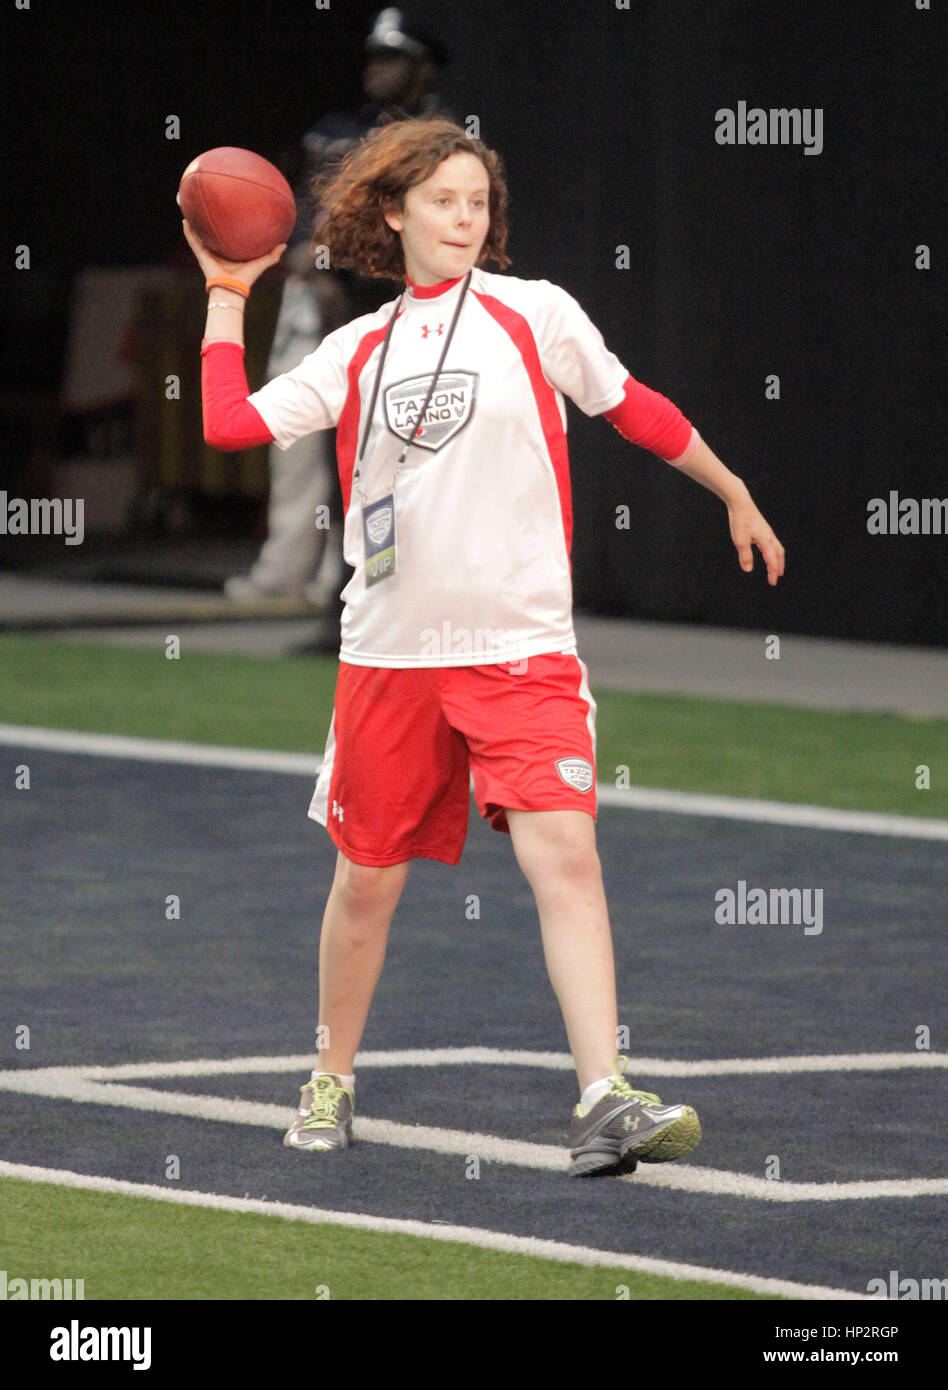 Sarah Ramos practices passing at the Tazon Latino V flag football game at Super Bowl NFL Experience at the Dallas Convention Center on February 2, 2011 in Dallas, Texas. Photo by Francis Specker Stock Photo